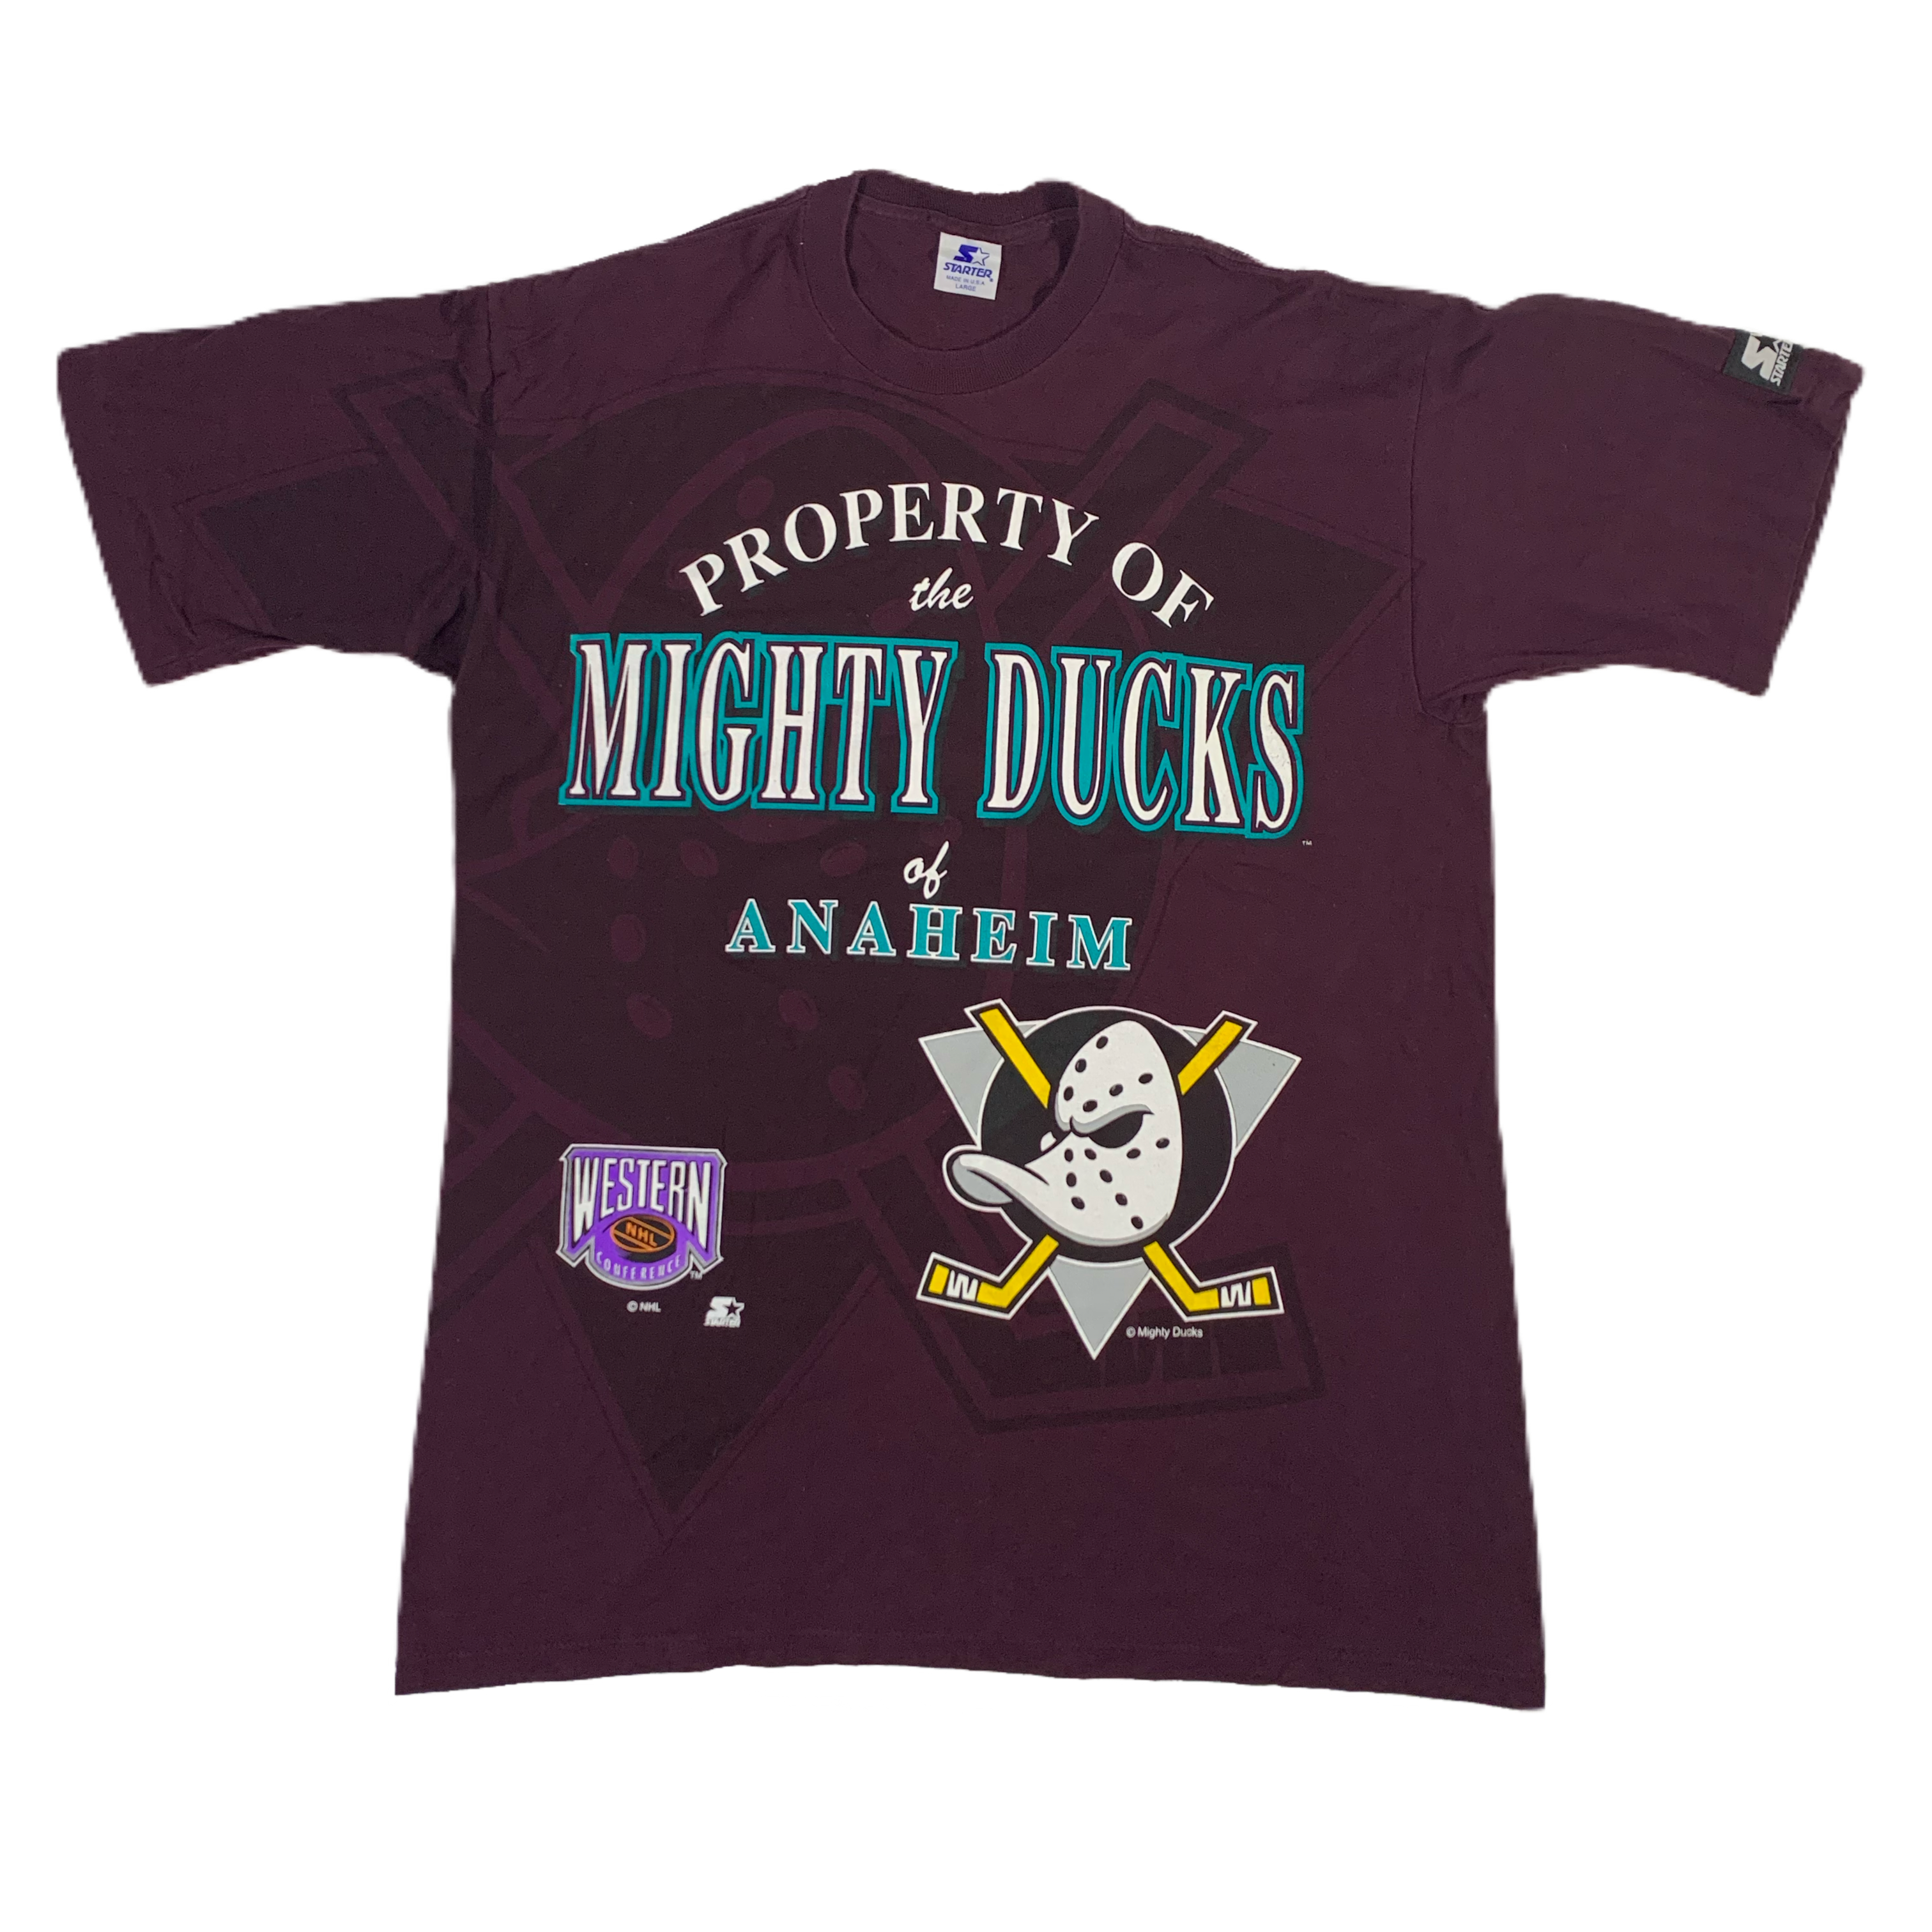 Vintage NHL Mighty Ducks T-shirt Western Conference Ice Hockey 